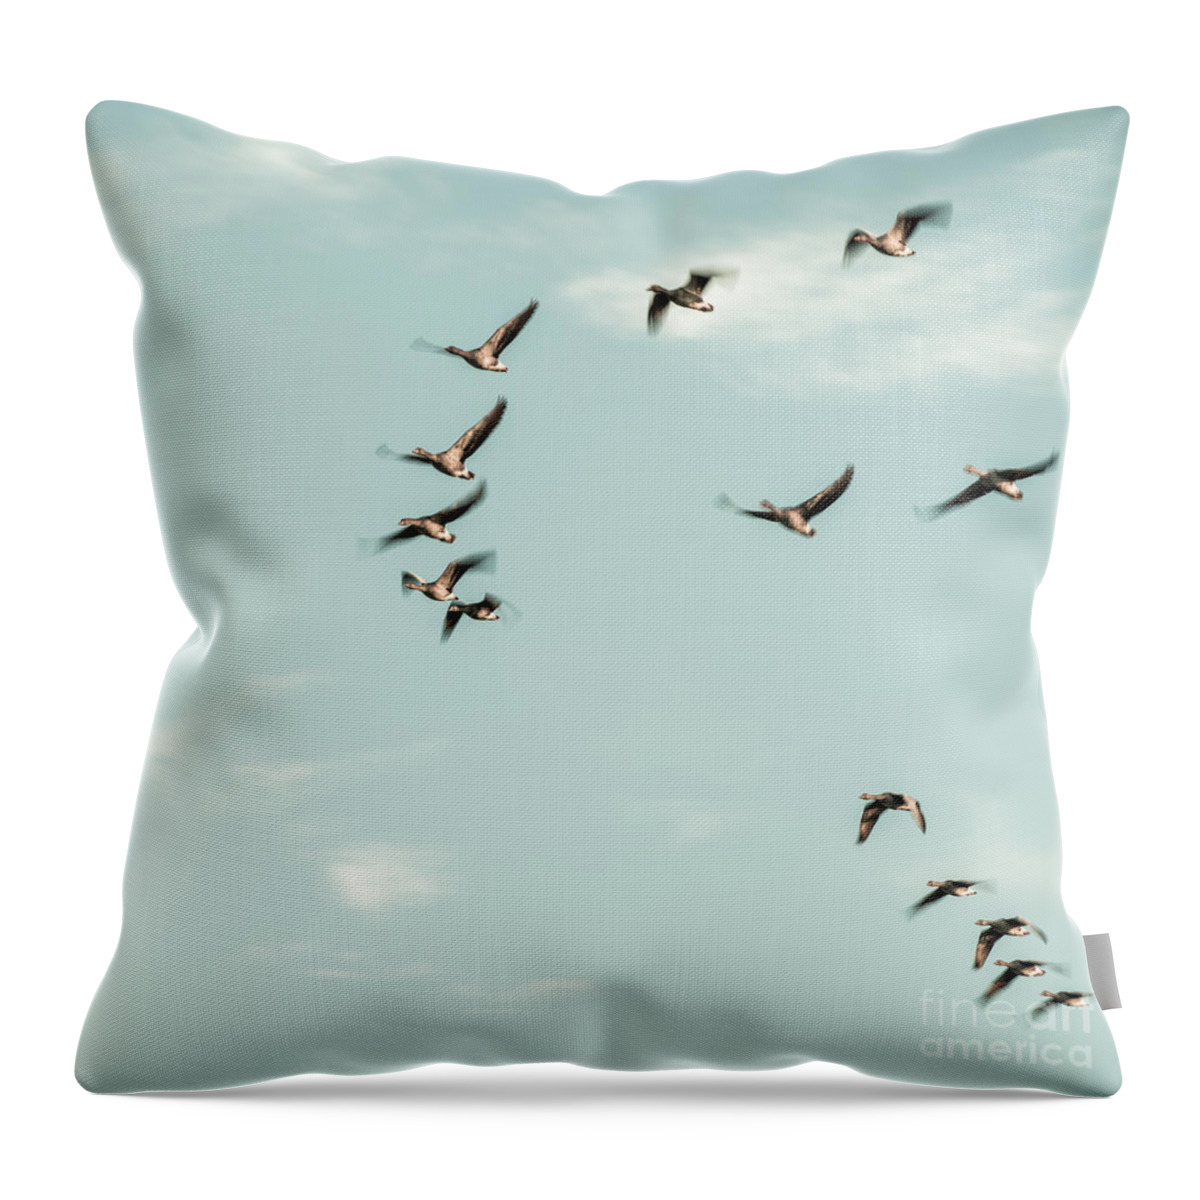 Ammersee Throw Pillow featuring the photograph Flight Of The Goose by Hannes Cmarits